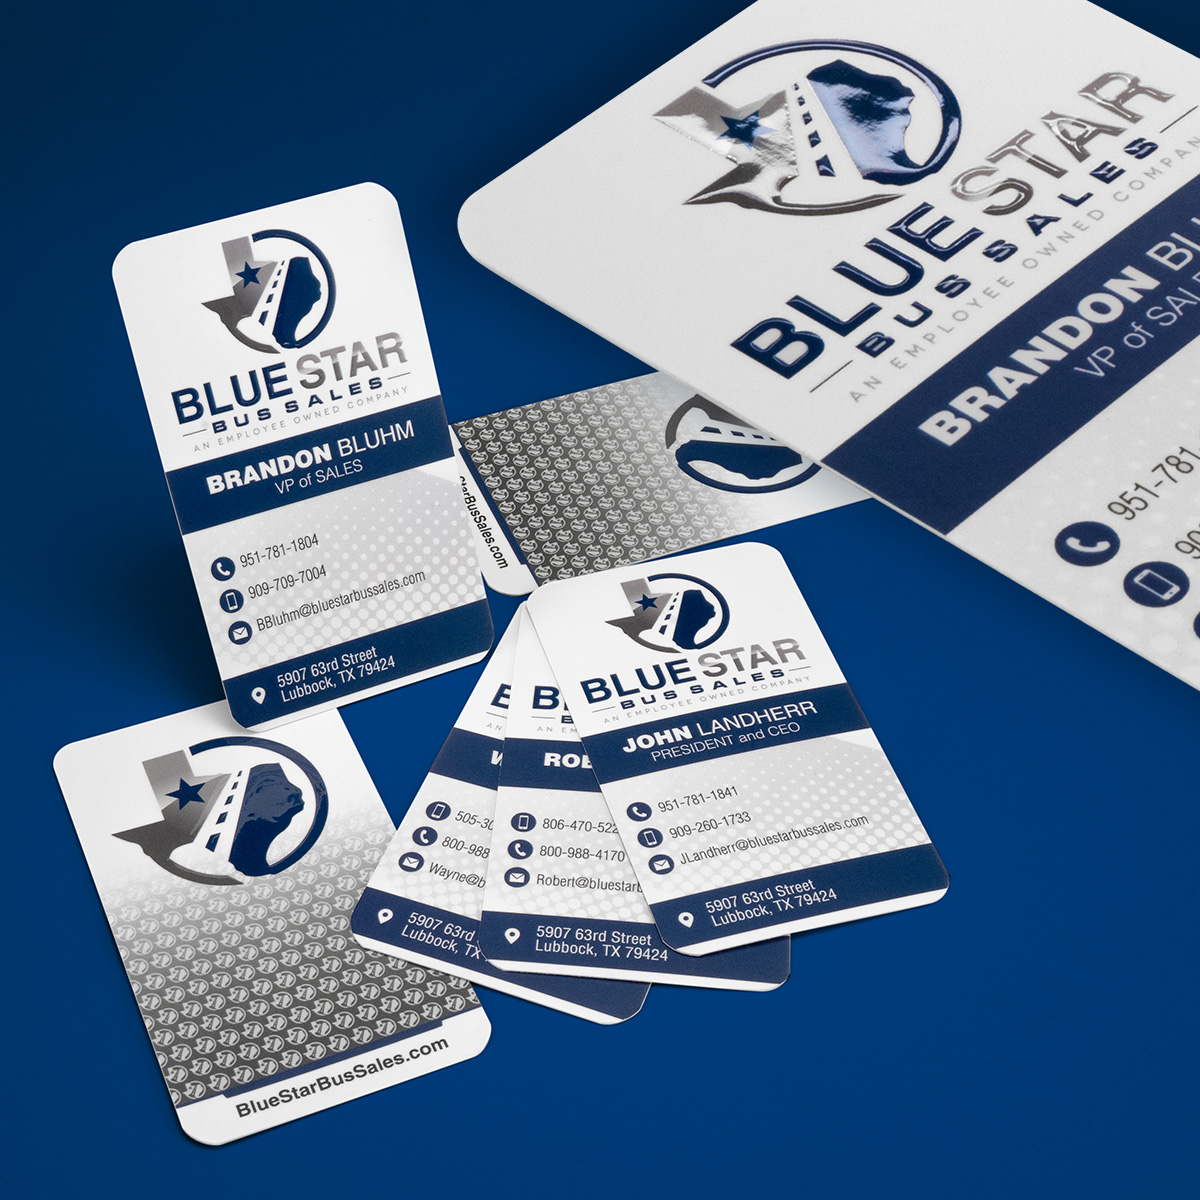 Business Cards: Blue Star Bus Sales